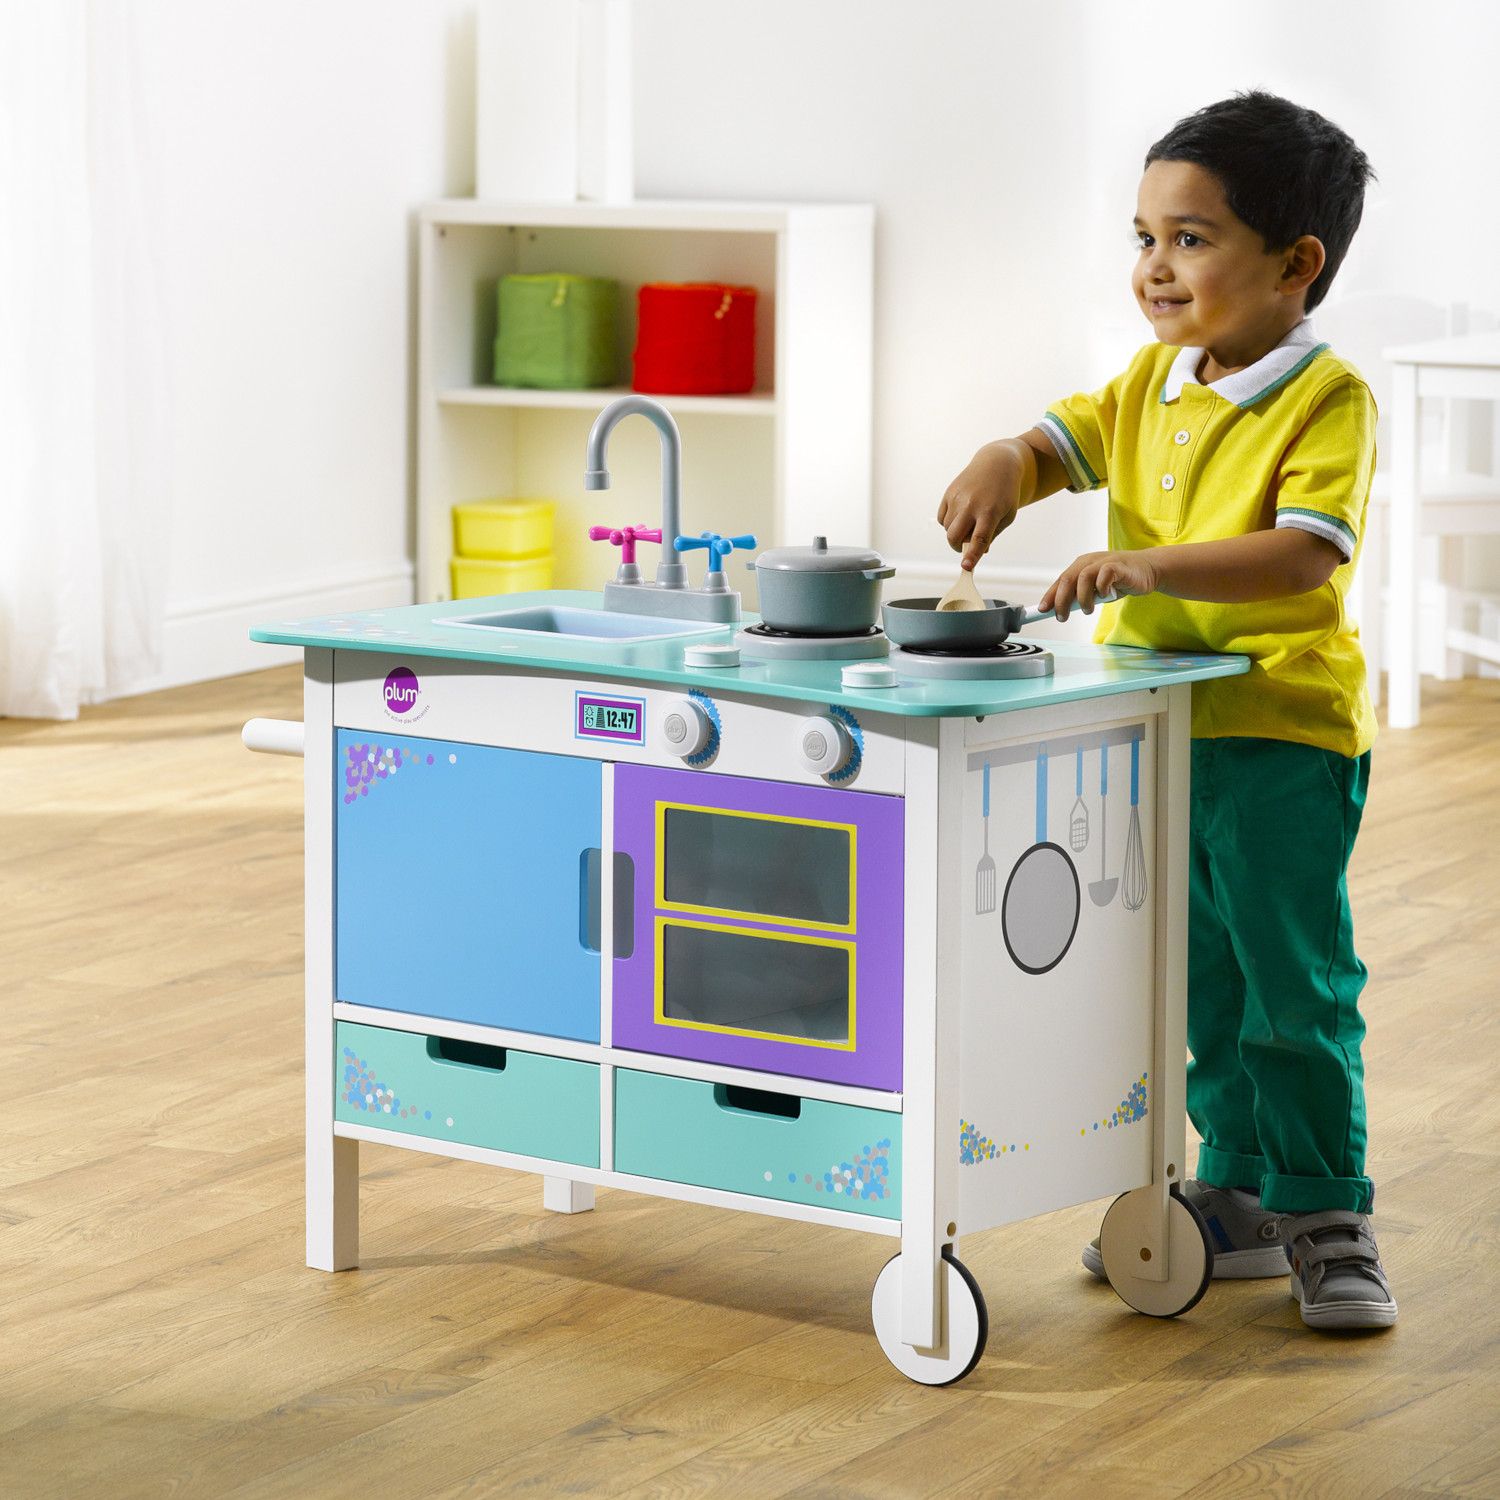 Plum Play Cook-a-Lot Trolley Wooden Play Kitchens - image 4 of 12